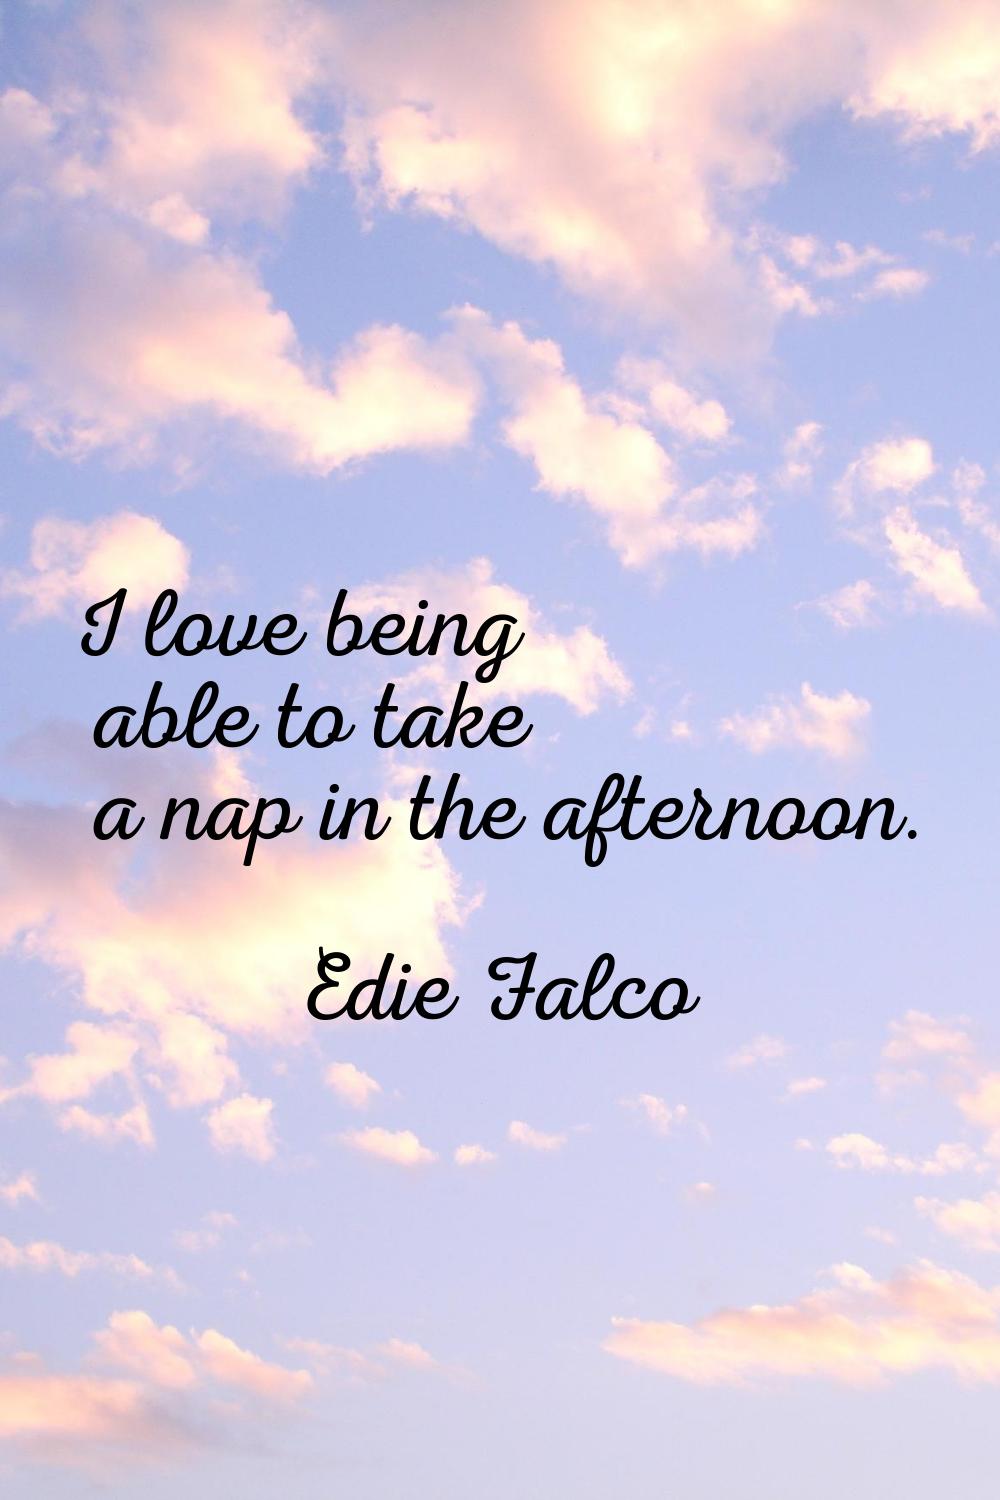 I love being able to take a nap in the afternoon.